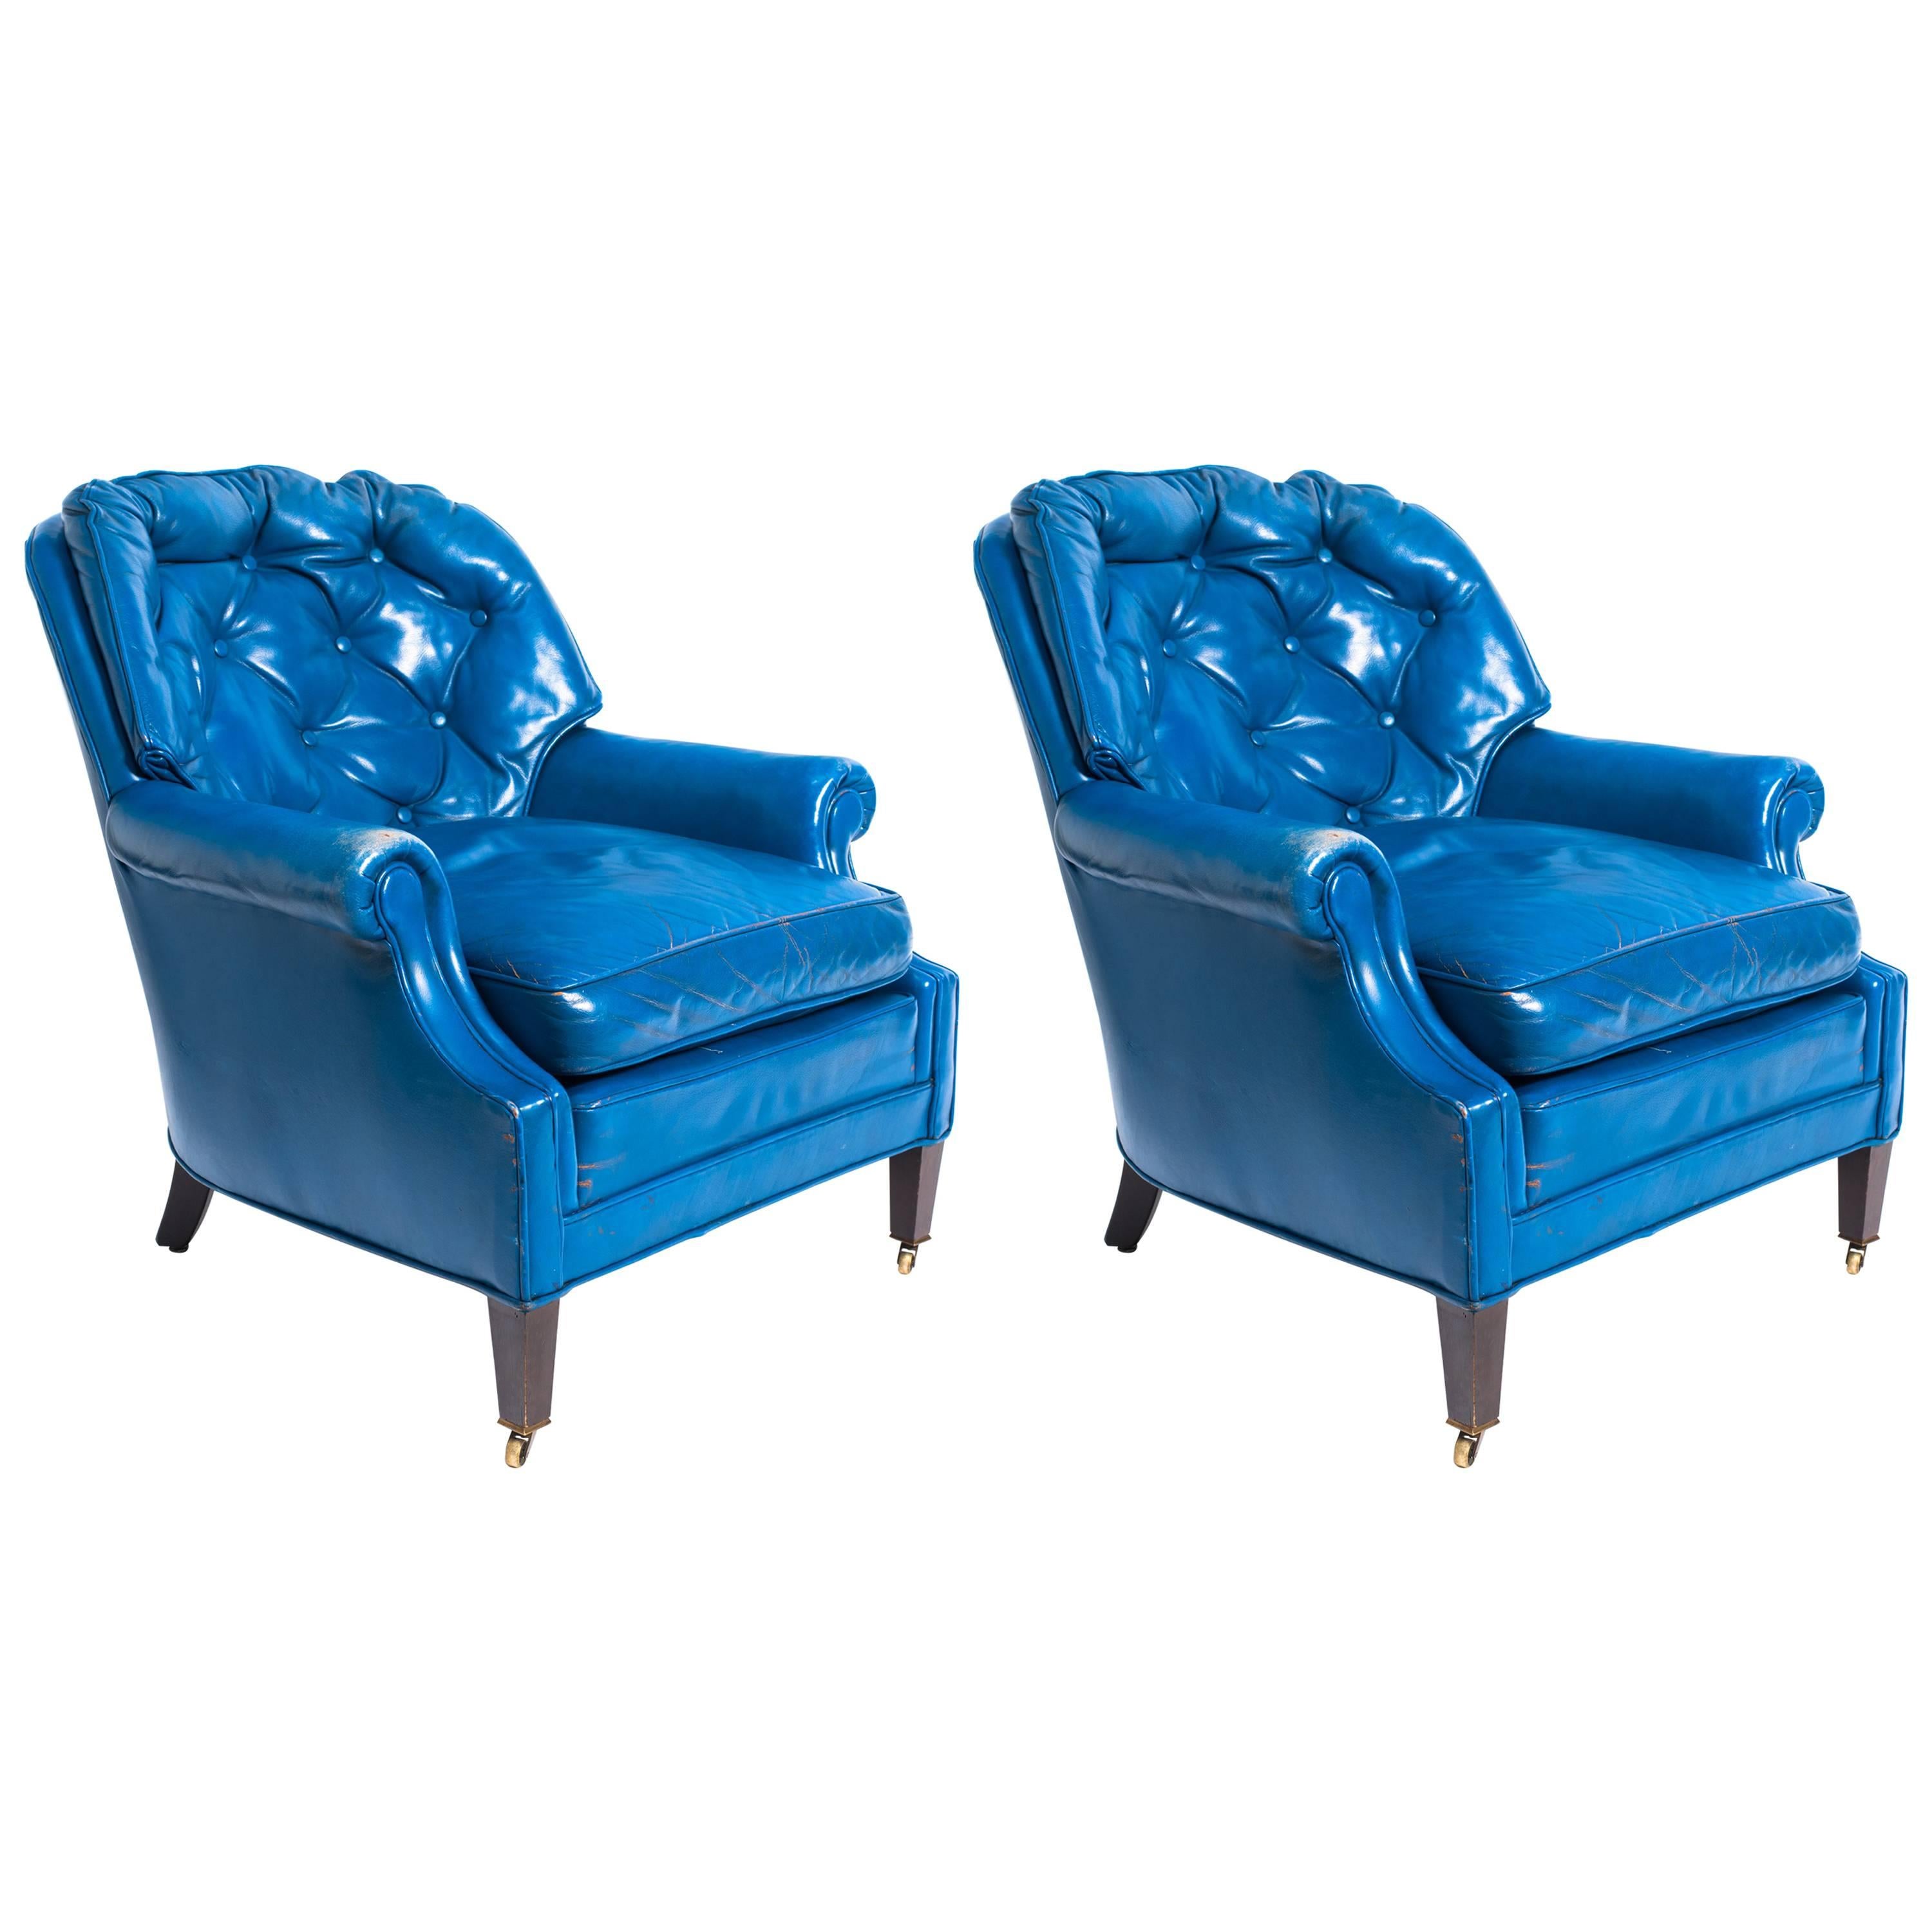 Pair of Distressed Blue Leather Lounge Chair with Ottoman